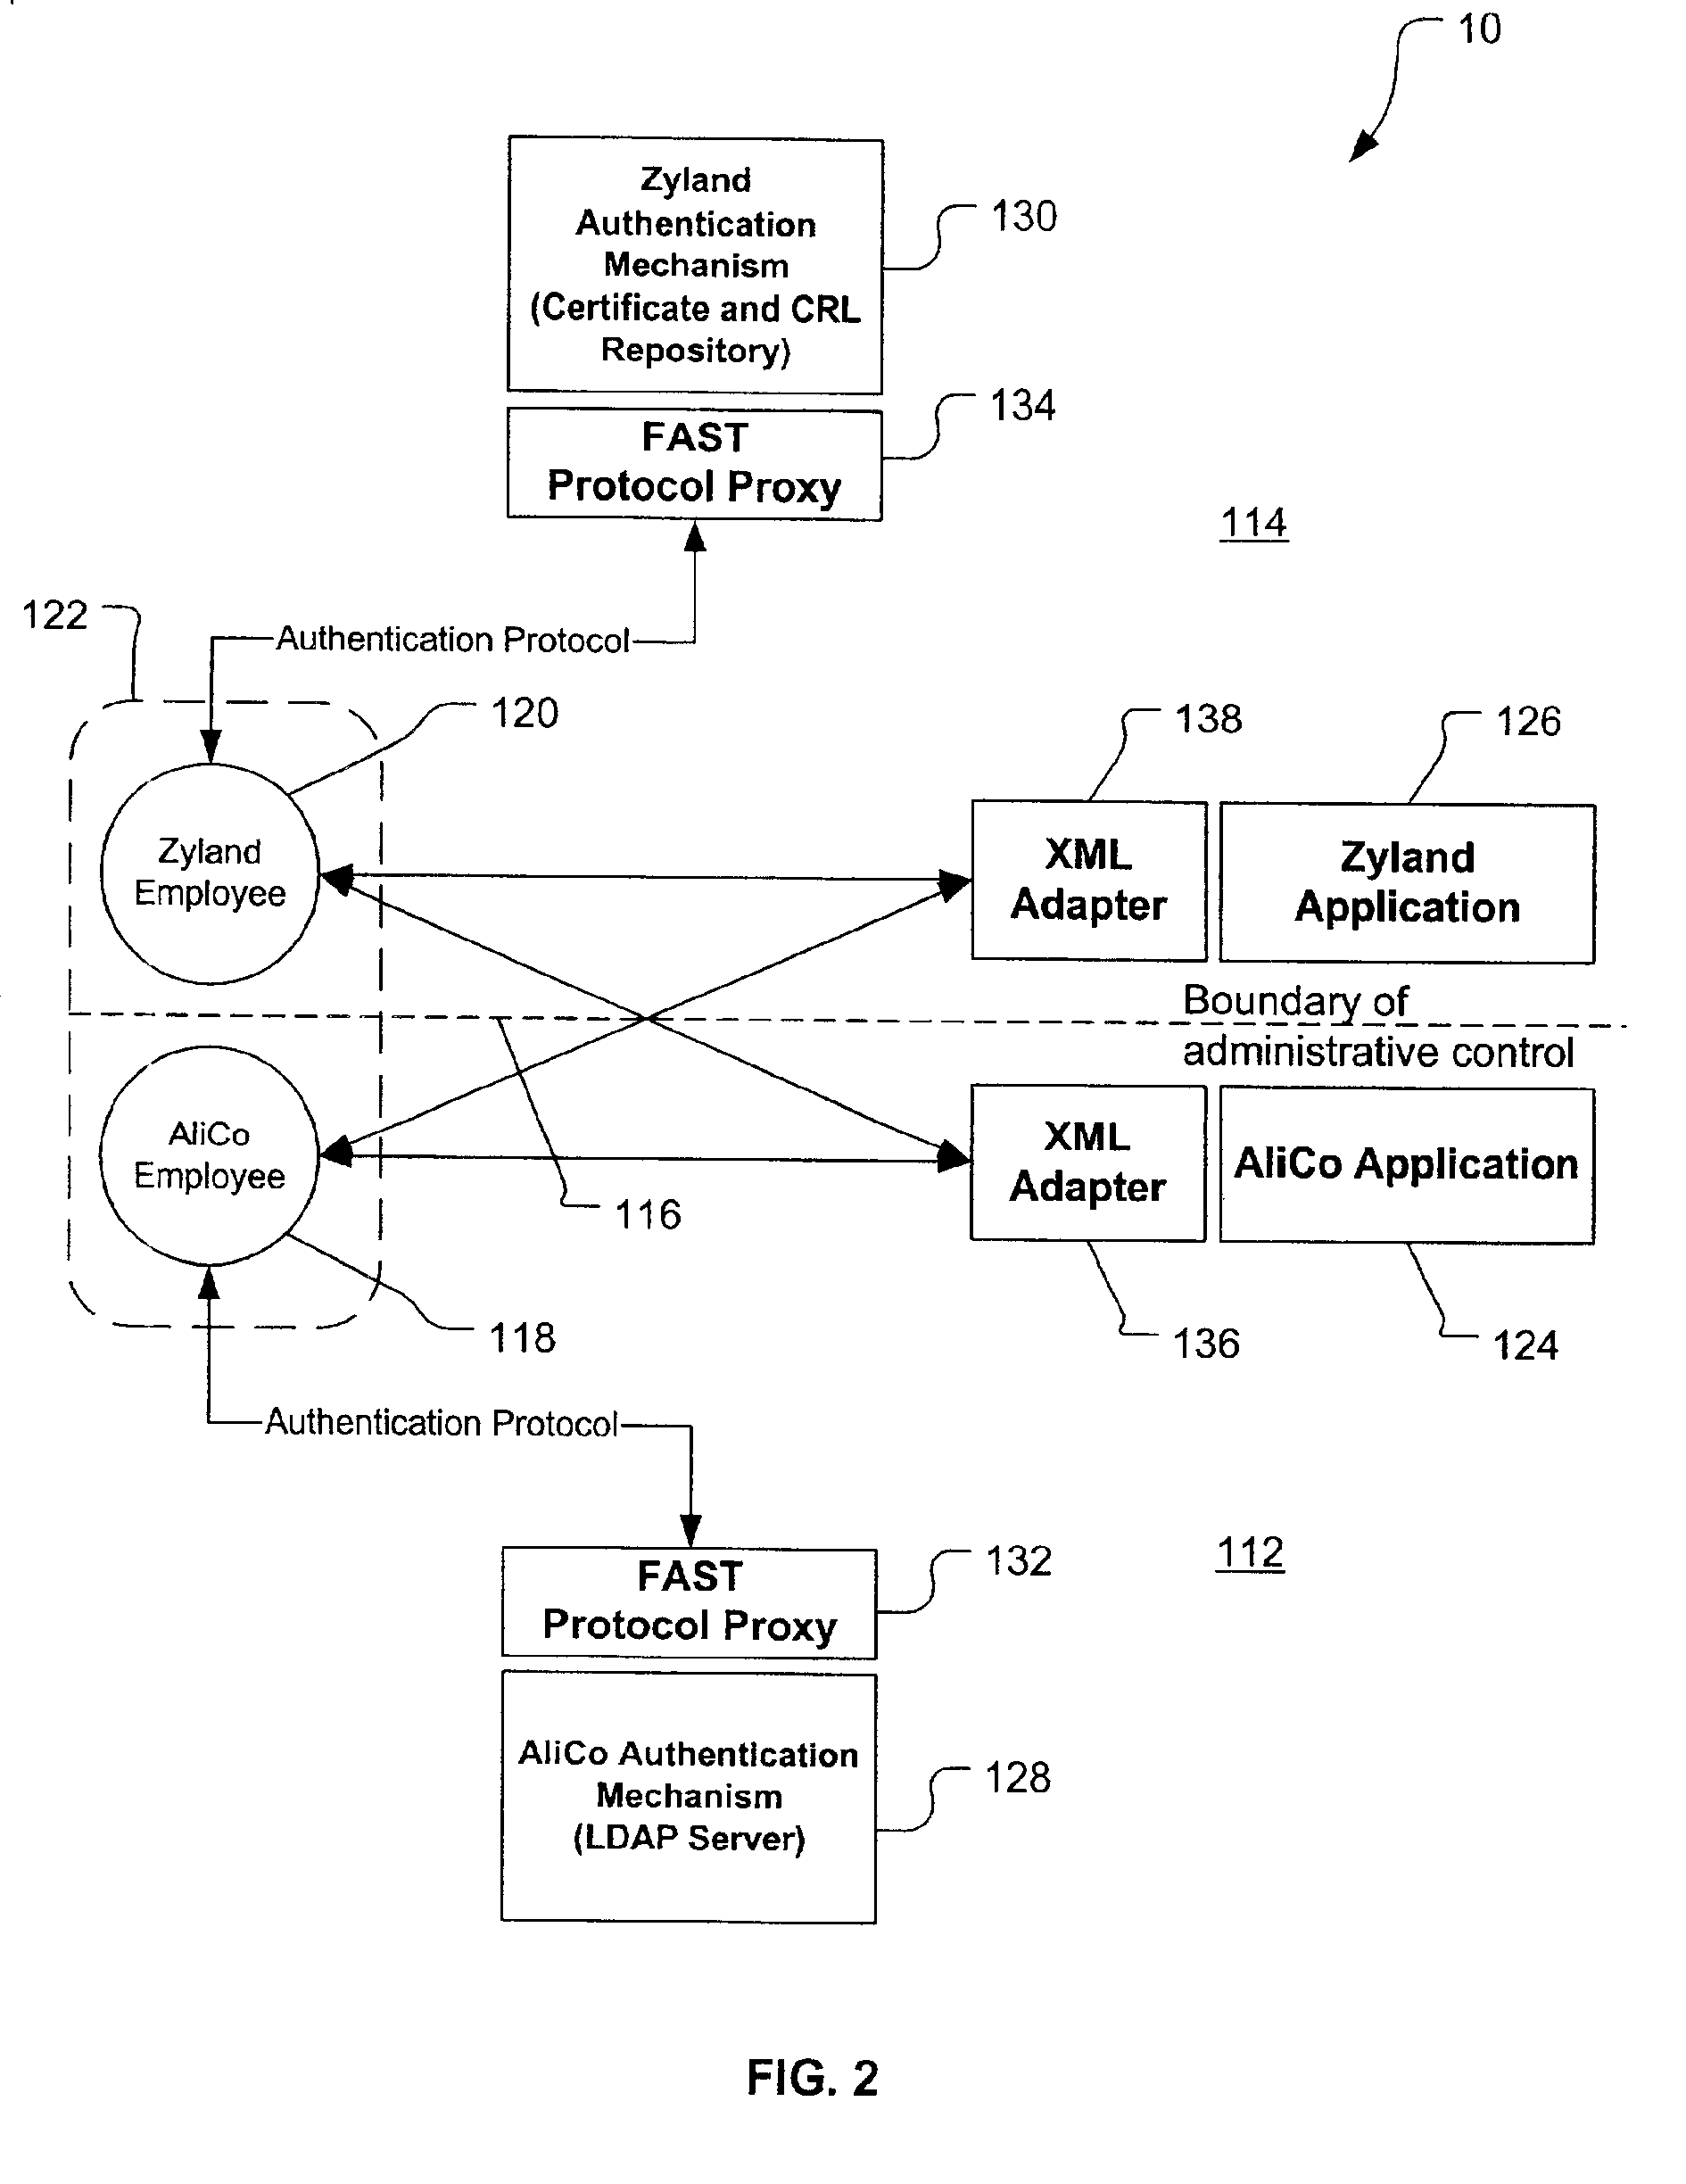 Method and system of federated authentication service for interacting between agent and client and communicating with other components of the system to choose an appropriate mechanism for the subject from among the plurality of authentication mechanisms wherein the subject is selected from humans, client applications and applets